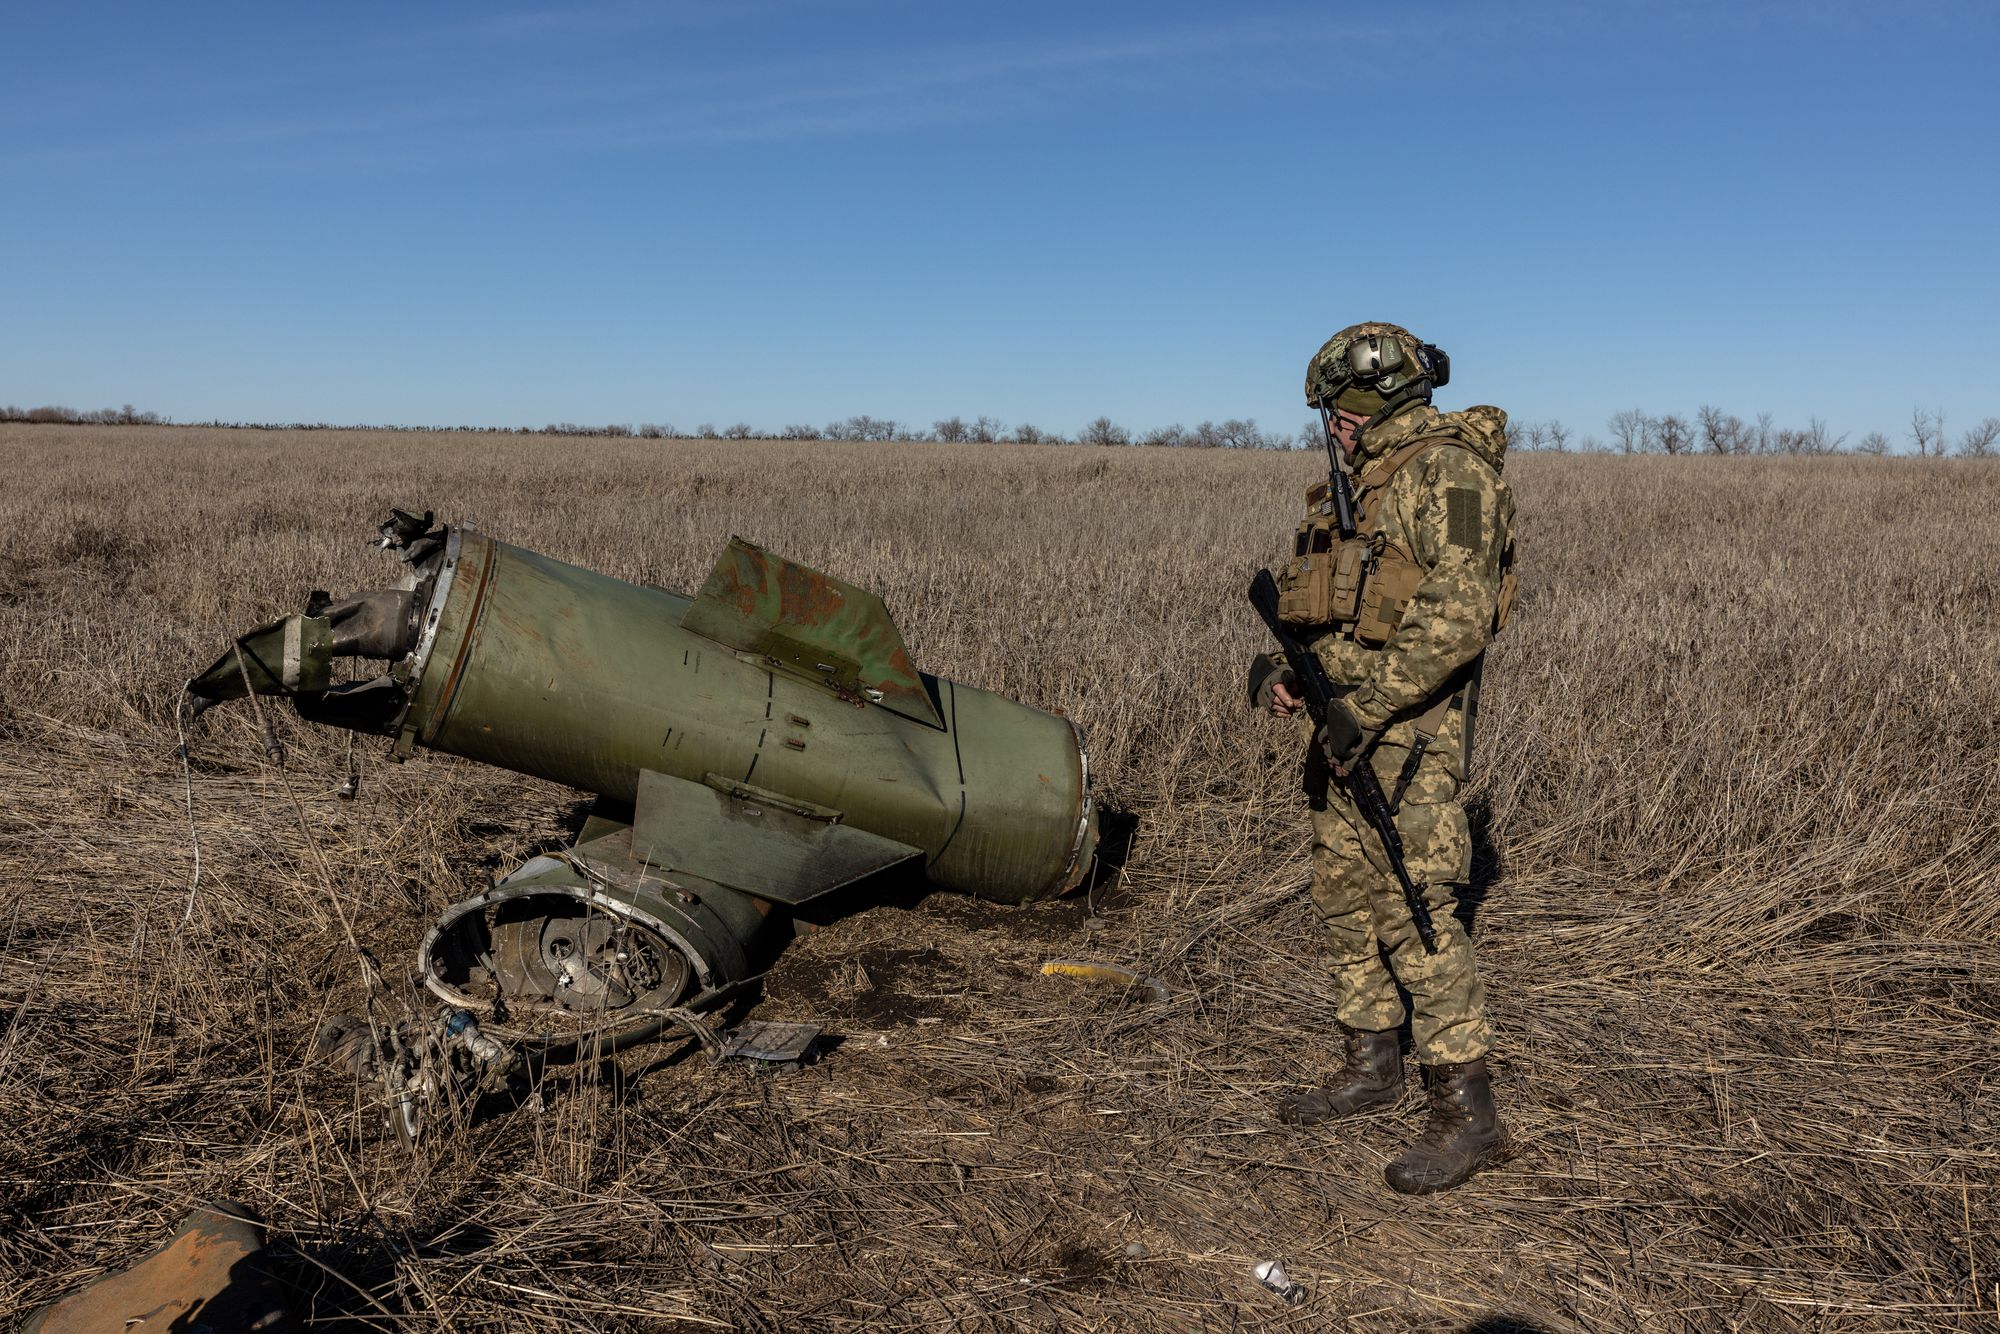 A year into full-scale invasion, West struggles to seize Russian assets for Ukraine